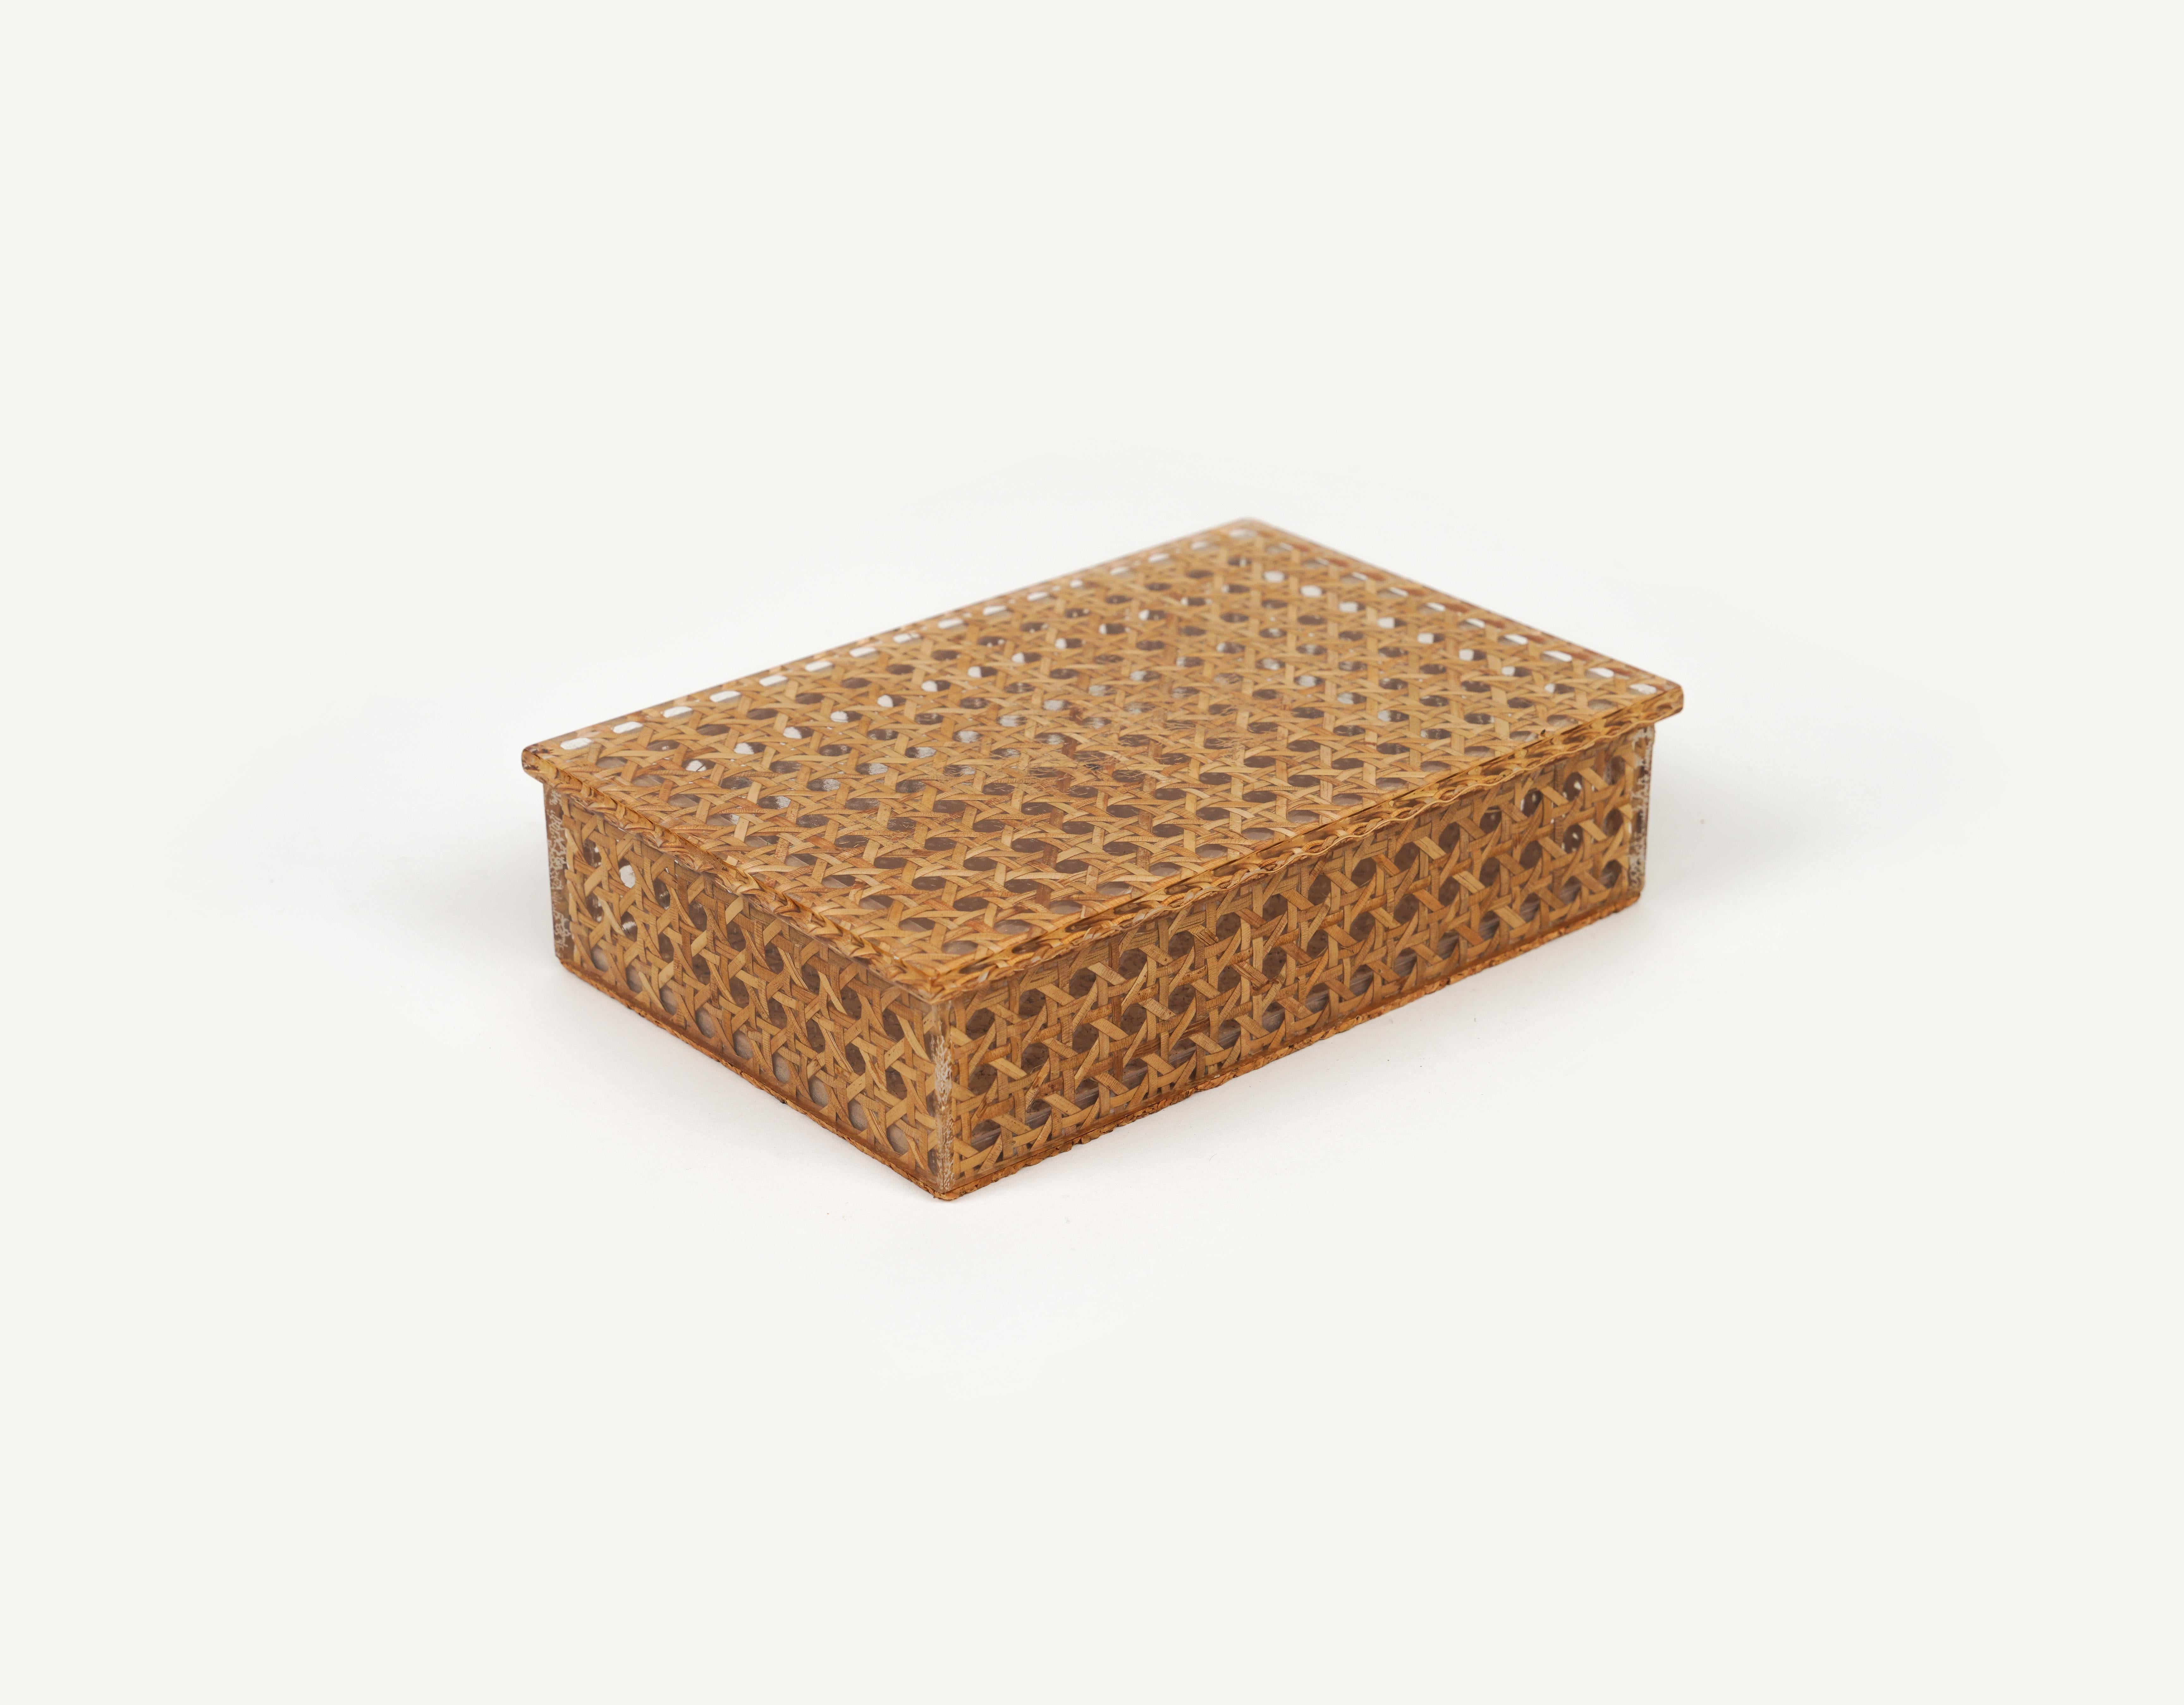 Midcentury Box in Rattan, Lucite and Cork Christian Dior Style, Italy 1970s For Sale 4